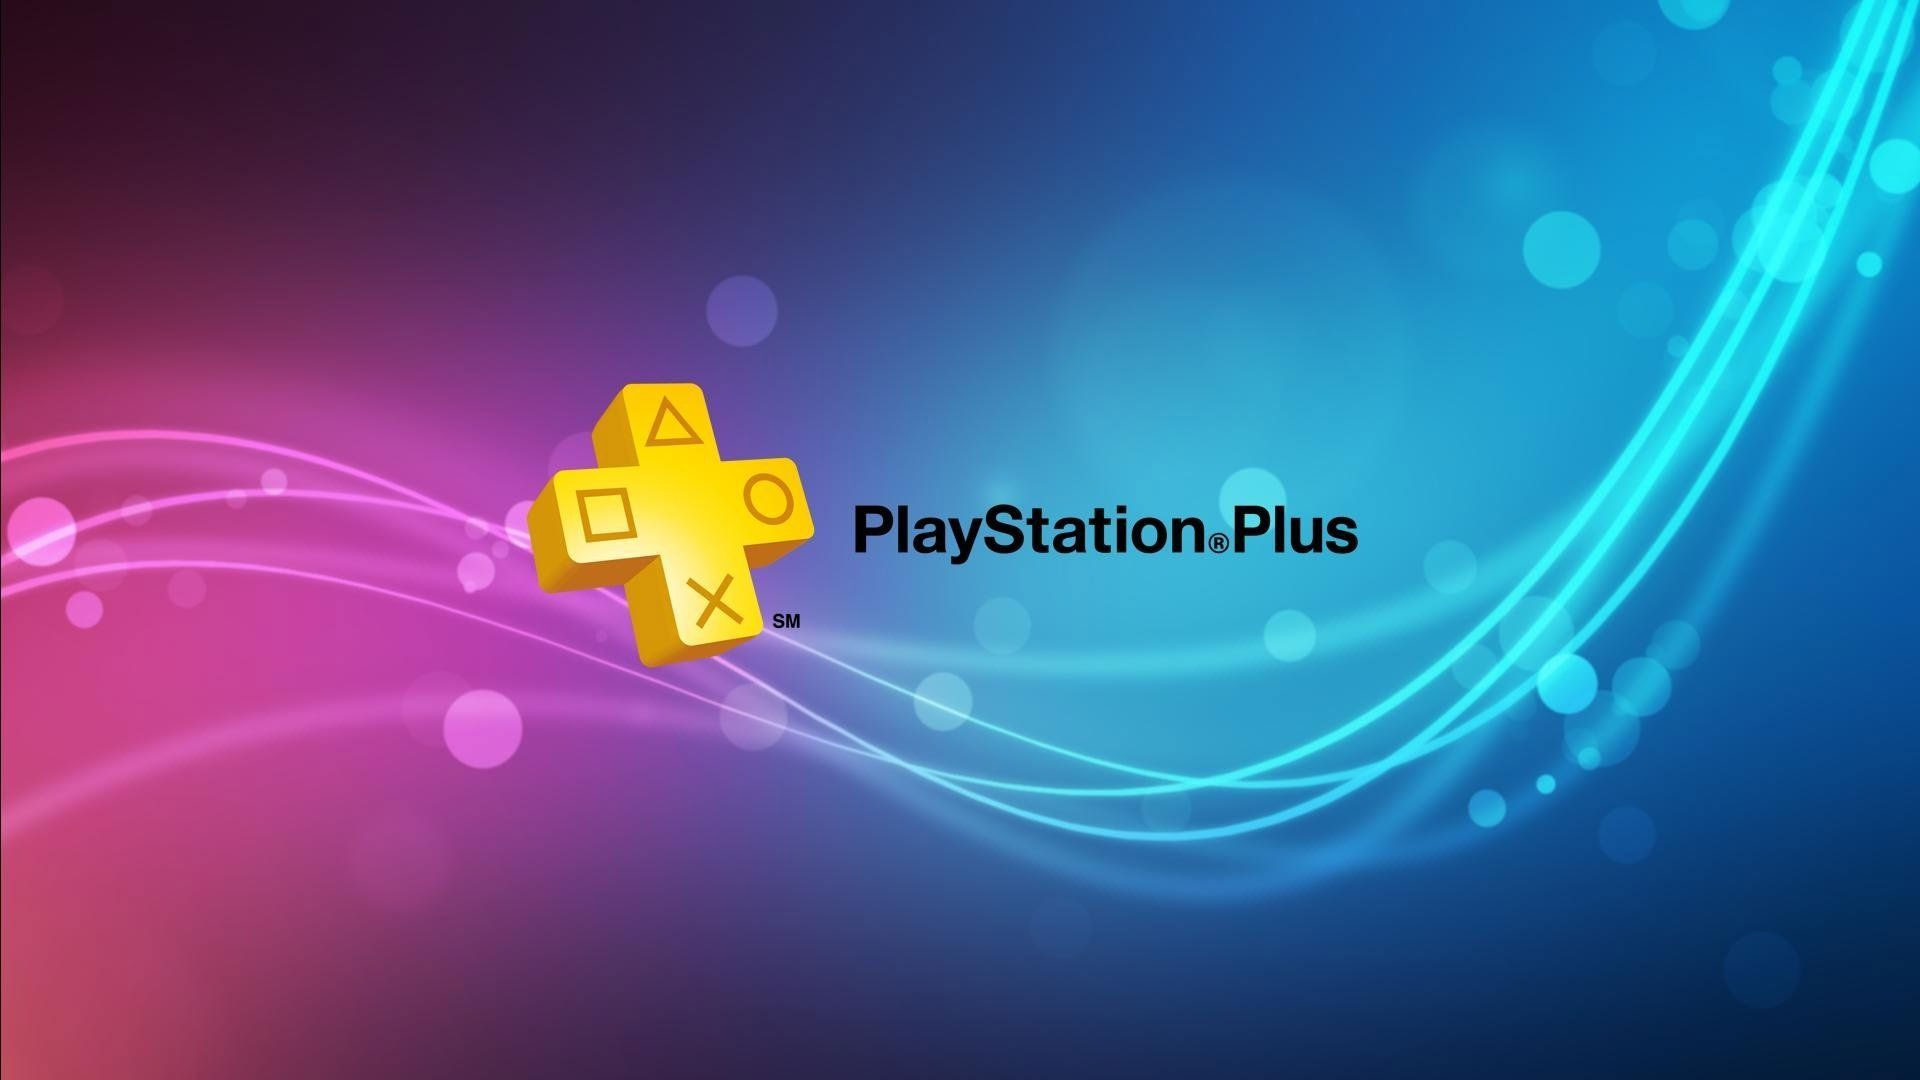 playstation plus  Image of playstation plus